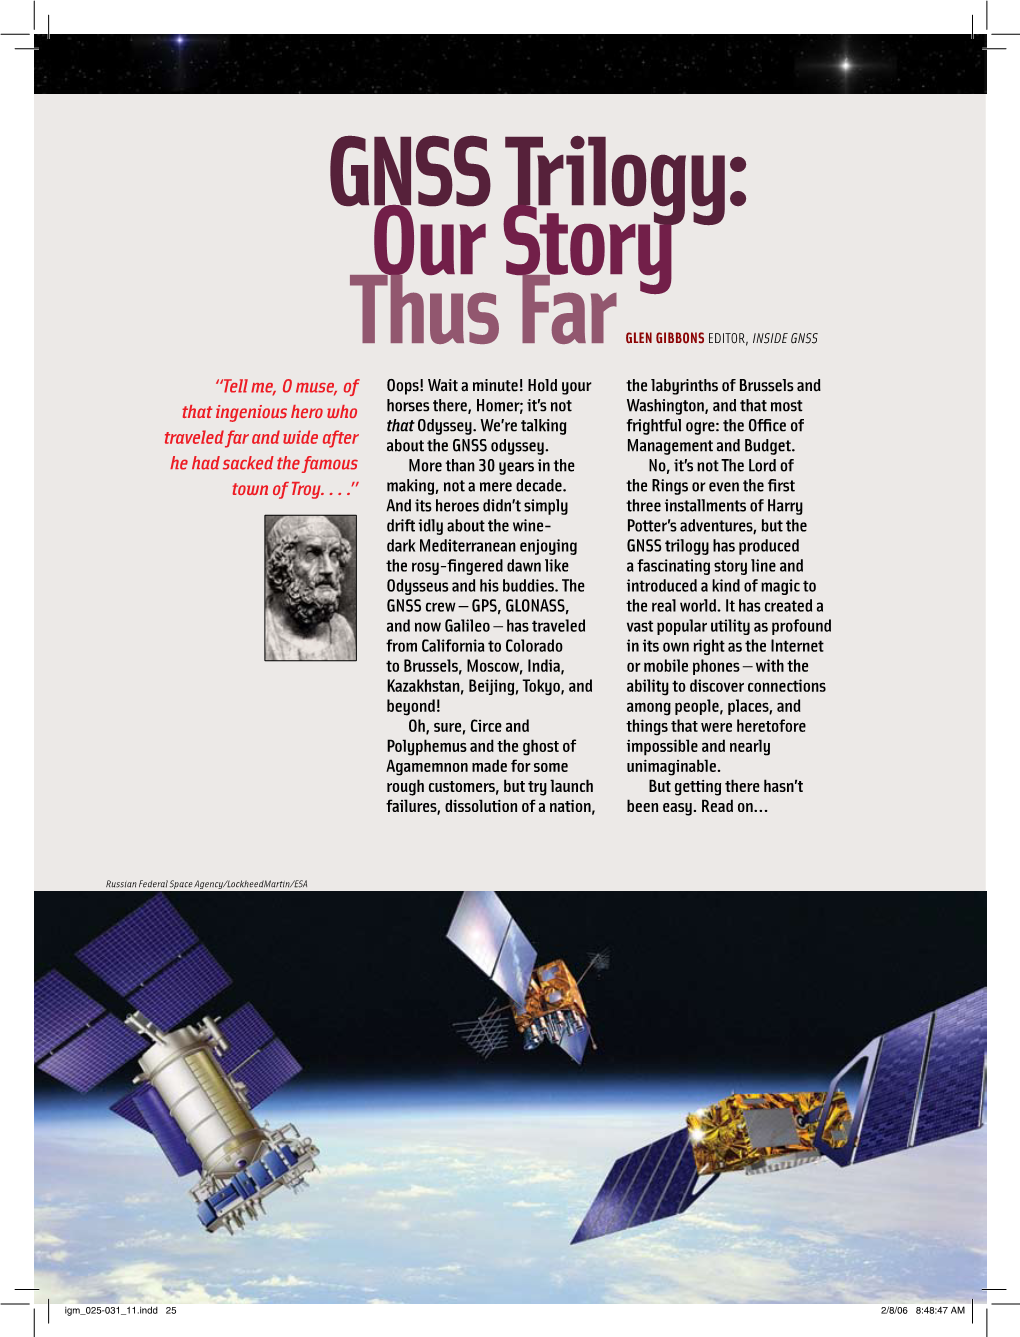 GNSS Trilogy: Our Story Thus